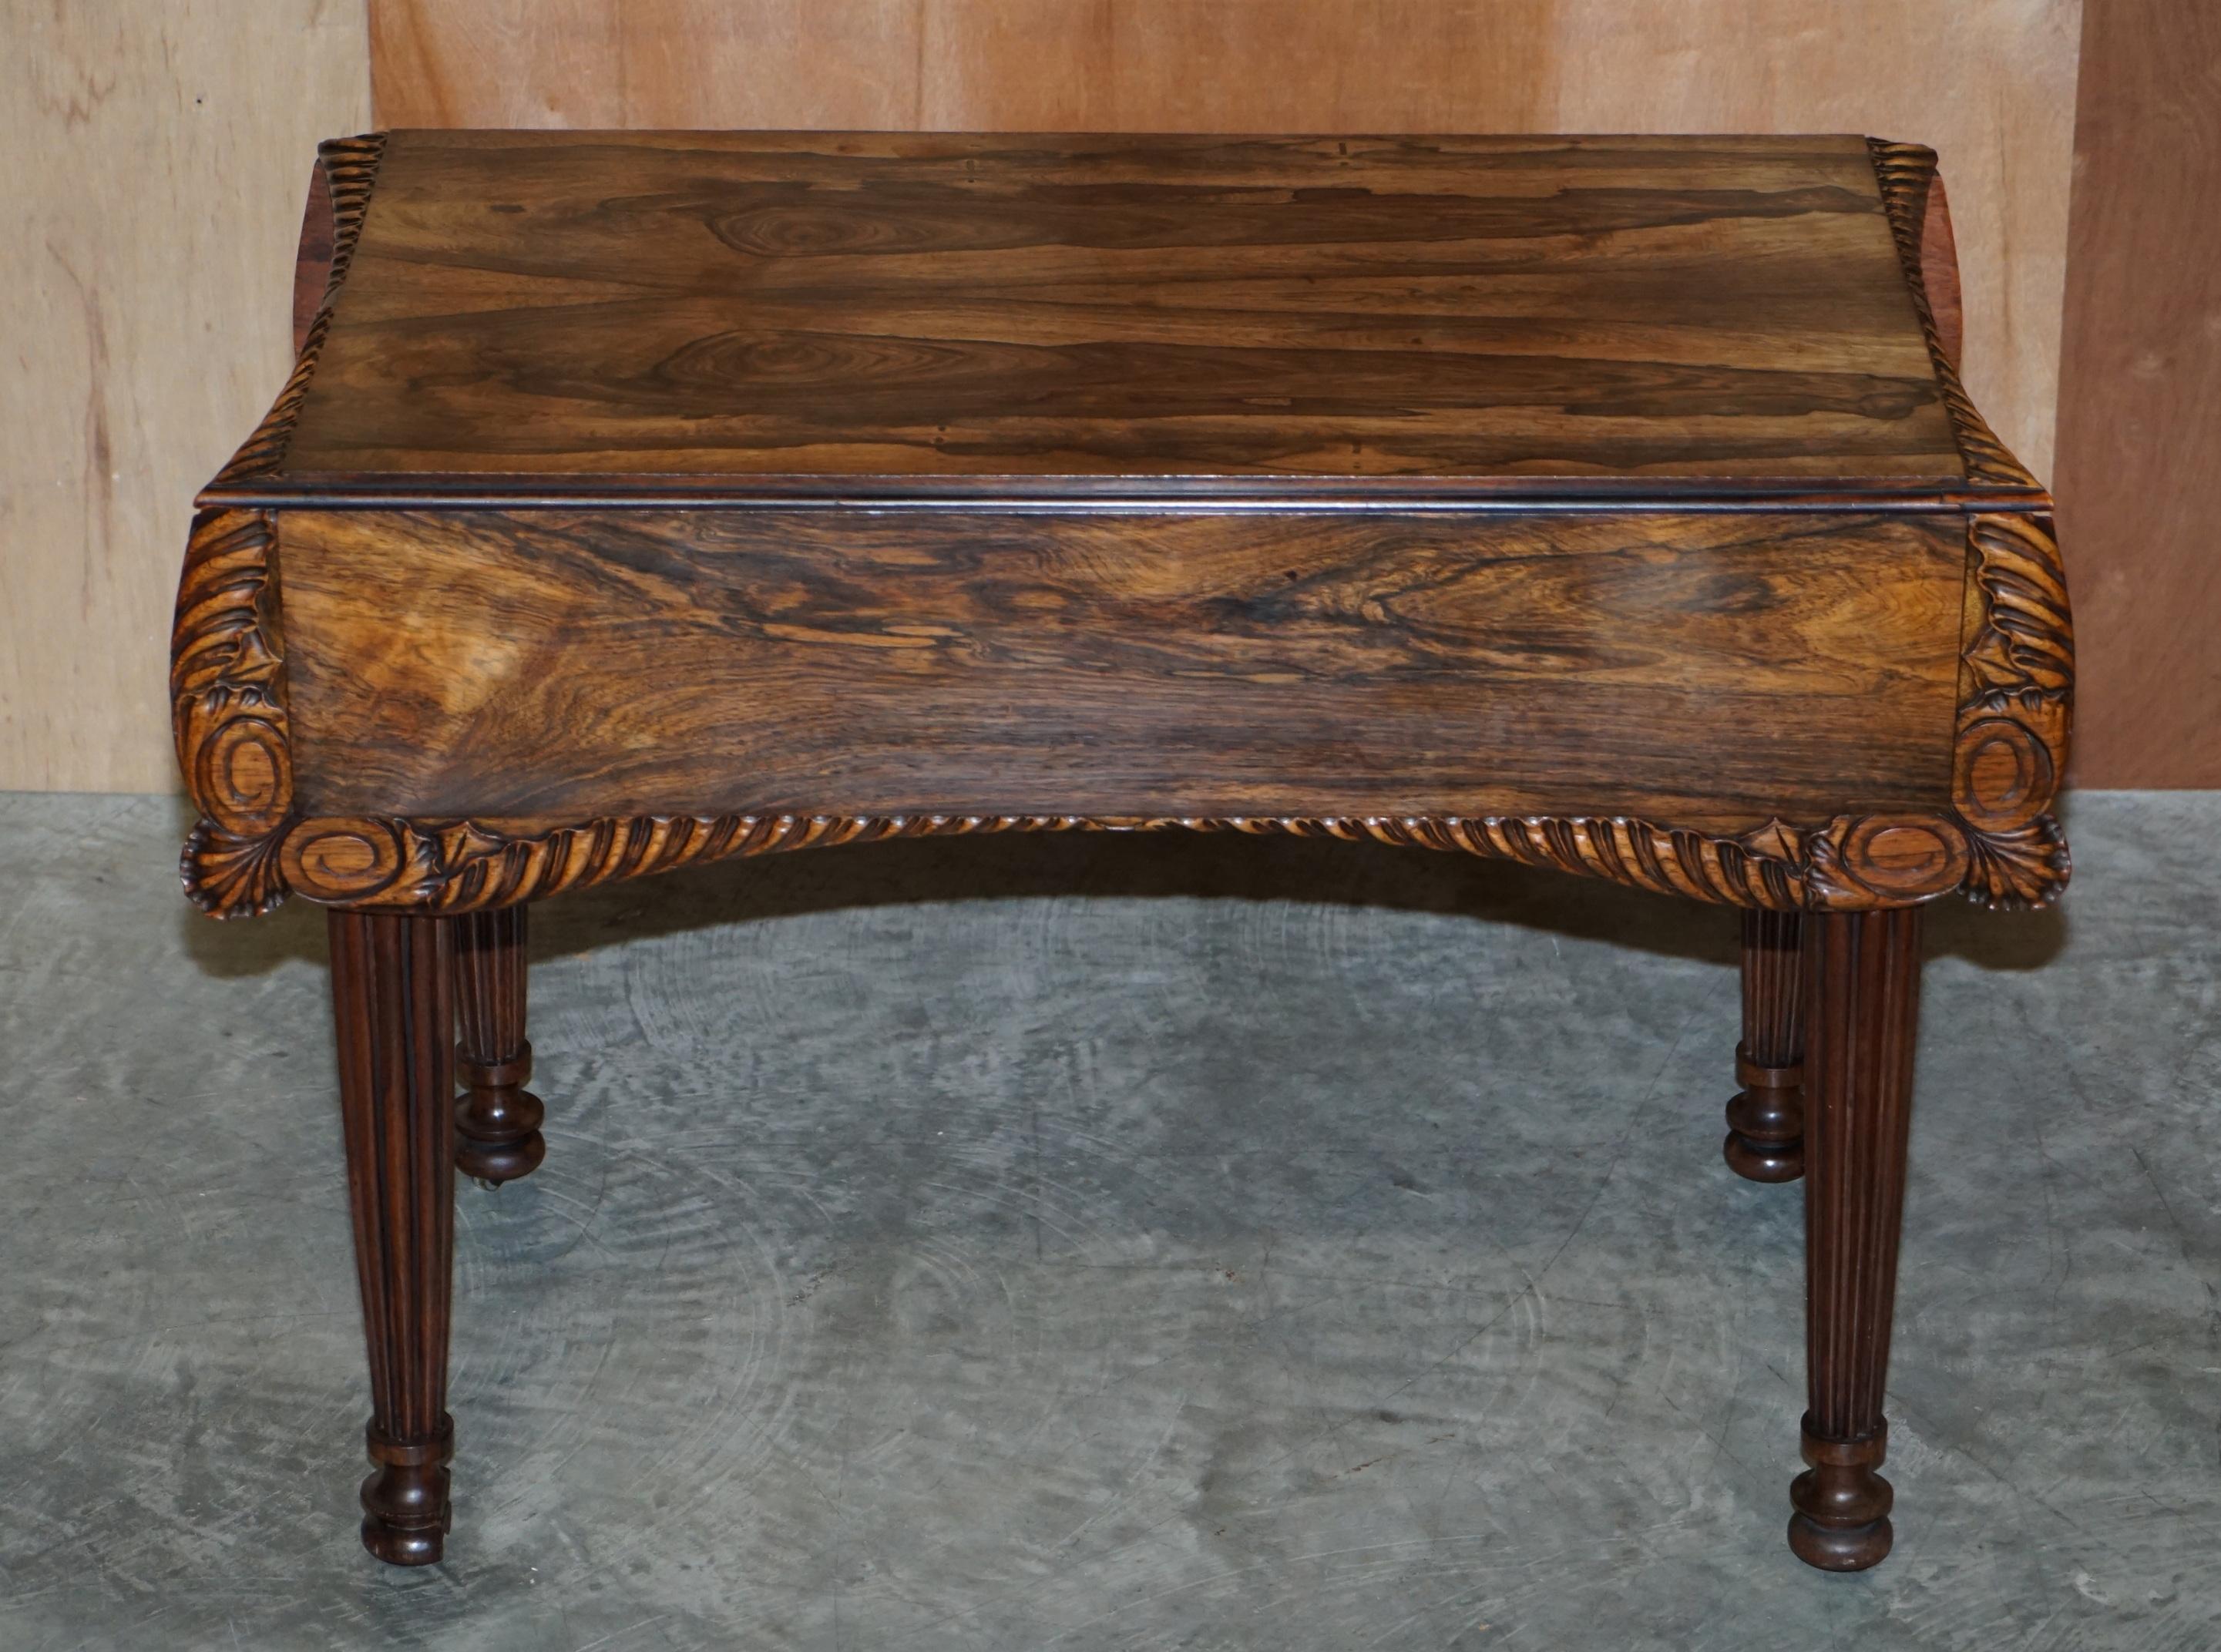 William IV Important William iv circa 1830 Pembroke Extending Table Exquisite Carved Timber For Sale